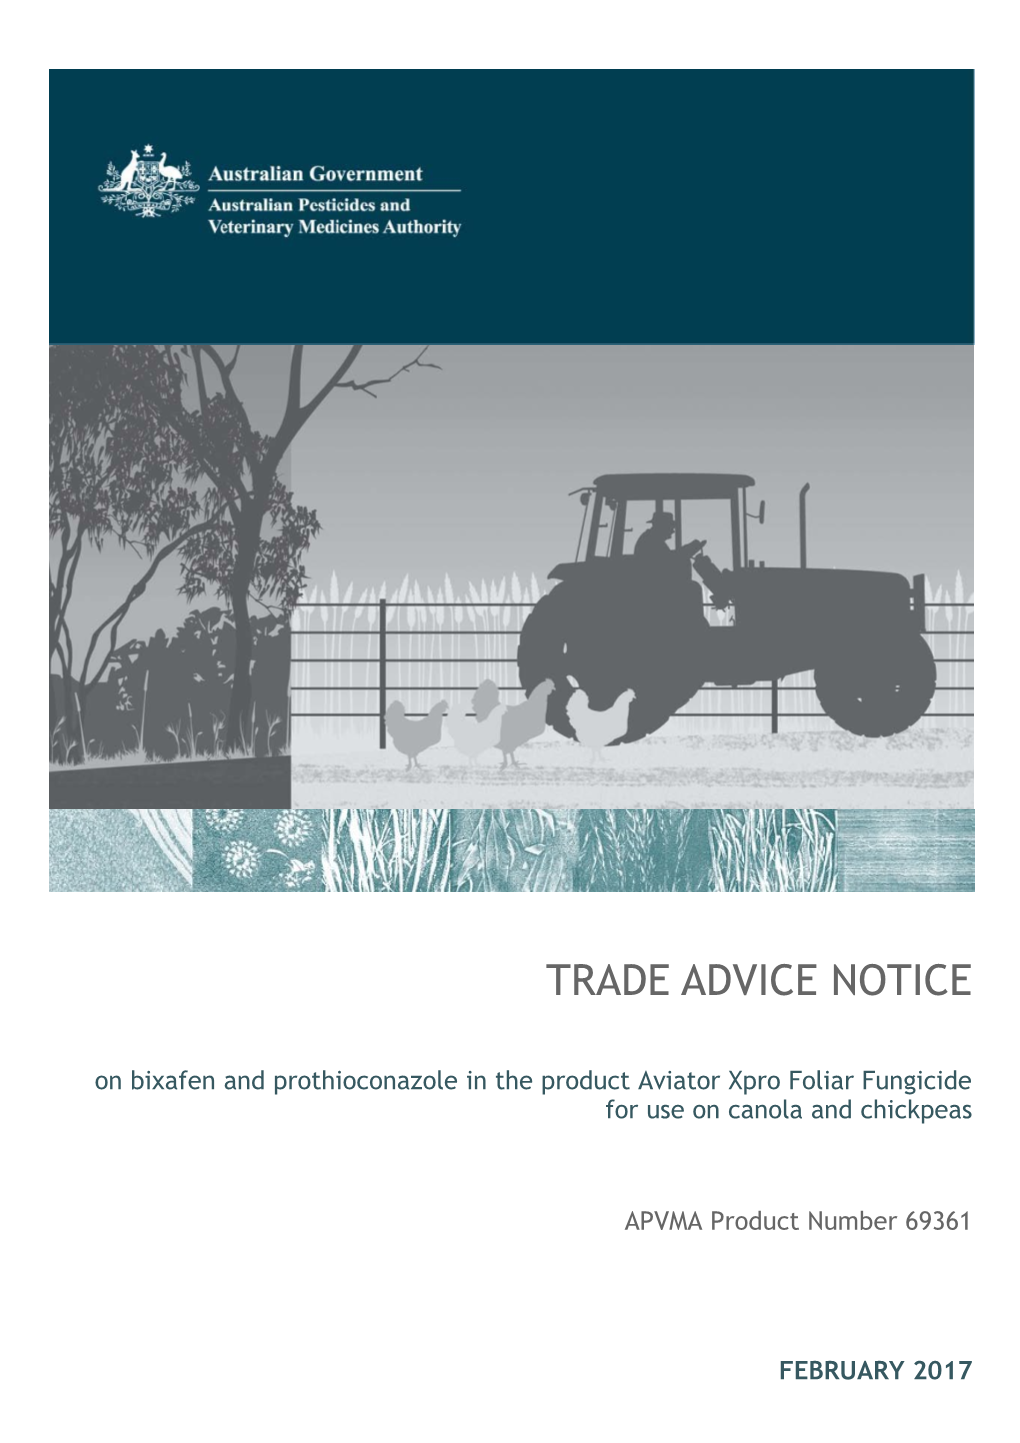 Trade Advice Notice on Bixafen and Prothioconazole in the Product Aviator Xpro Foliar Fungicide